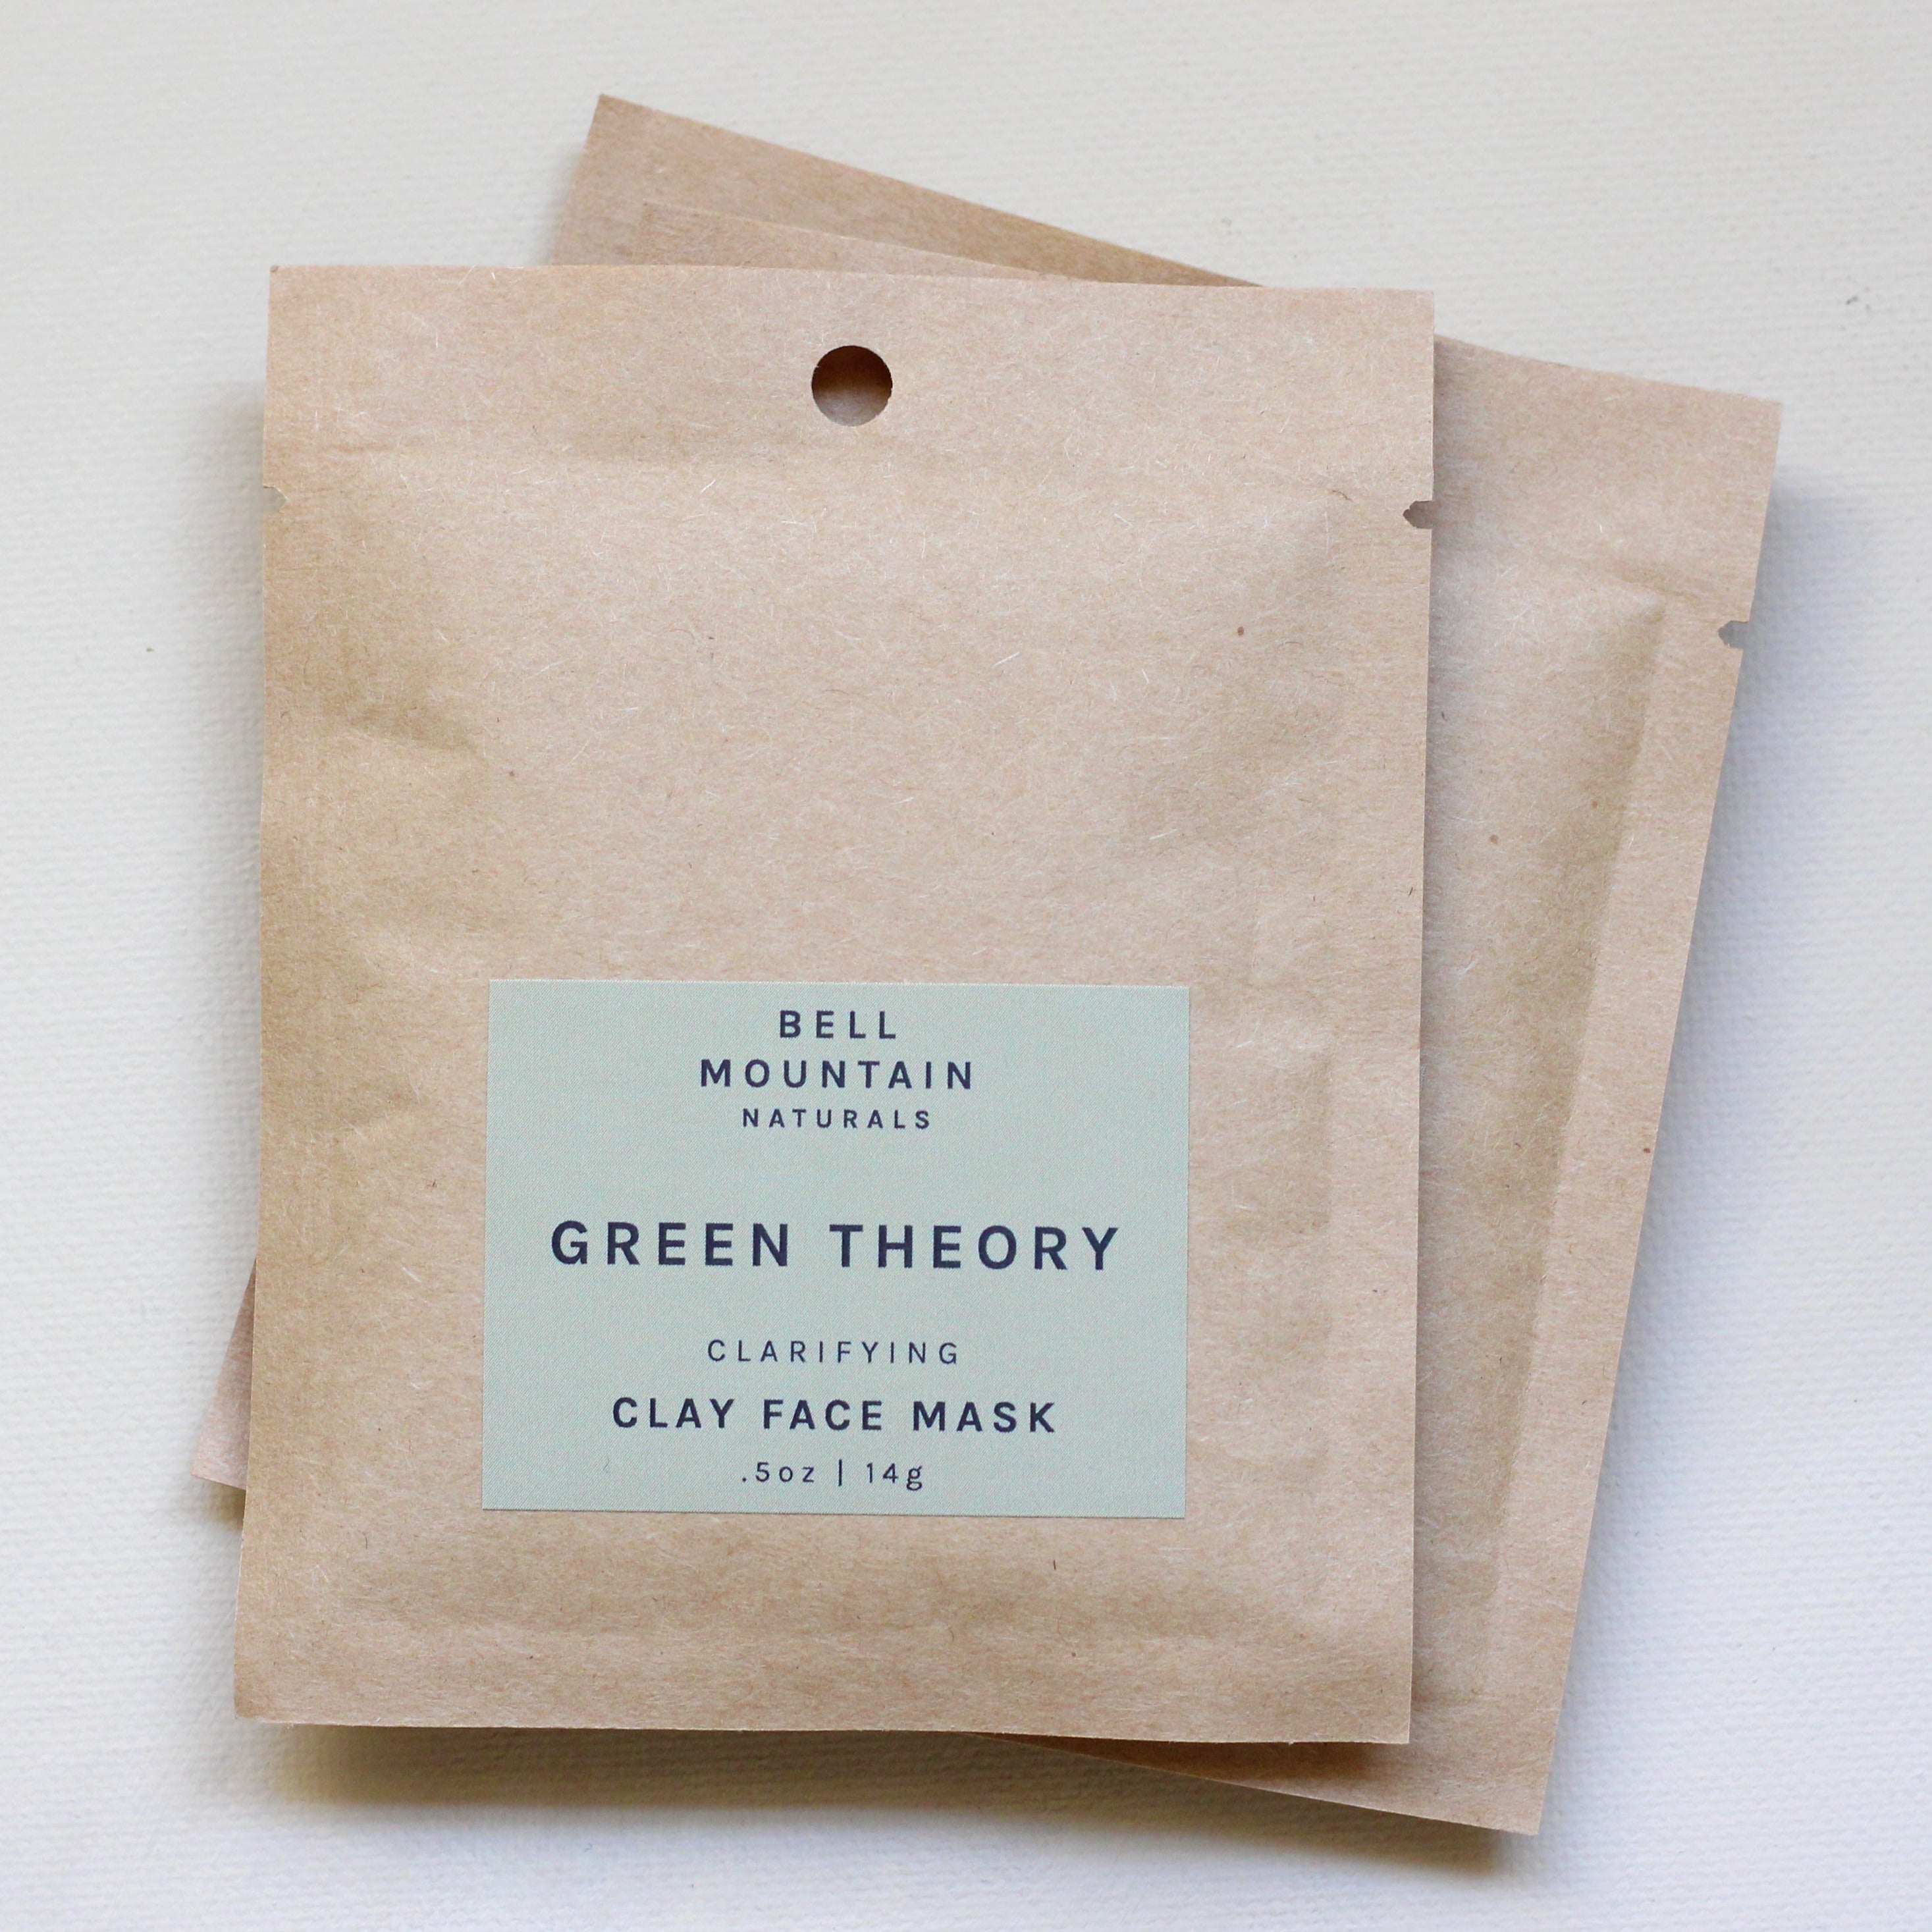 Bell Mountain Nautrals Green Theory Clay Face Mask | Well-Taylored Co.